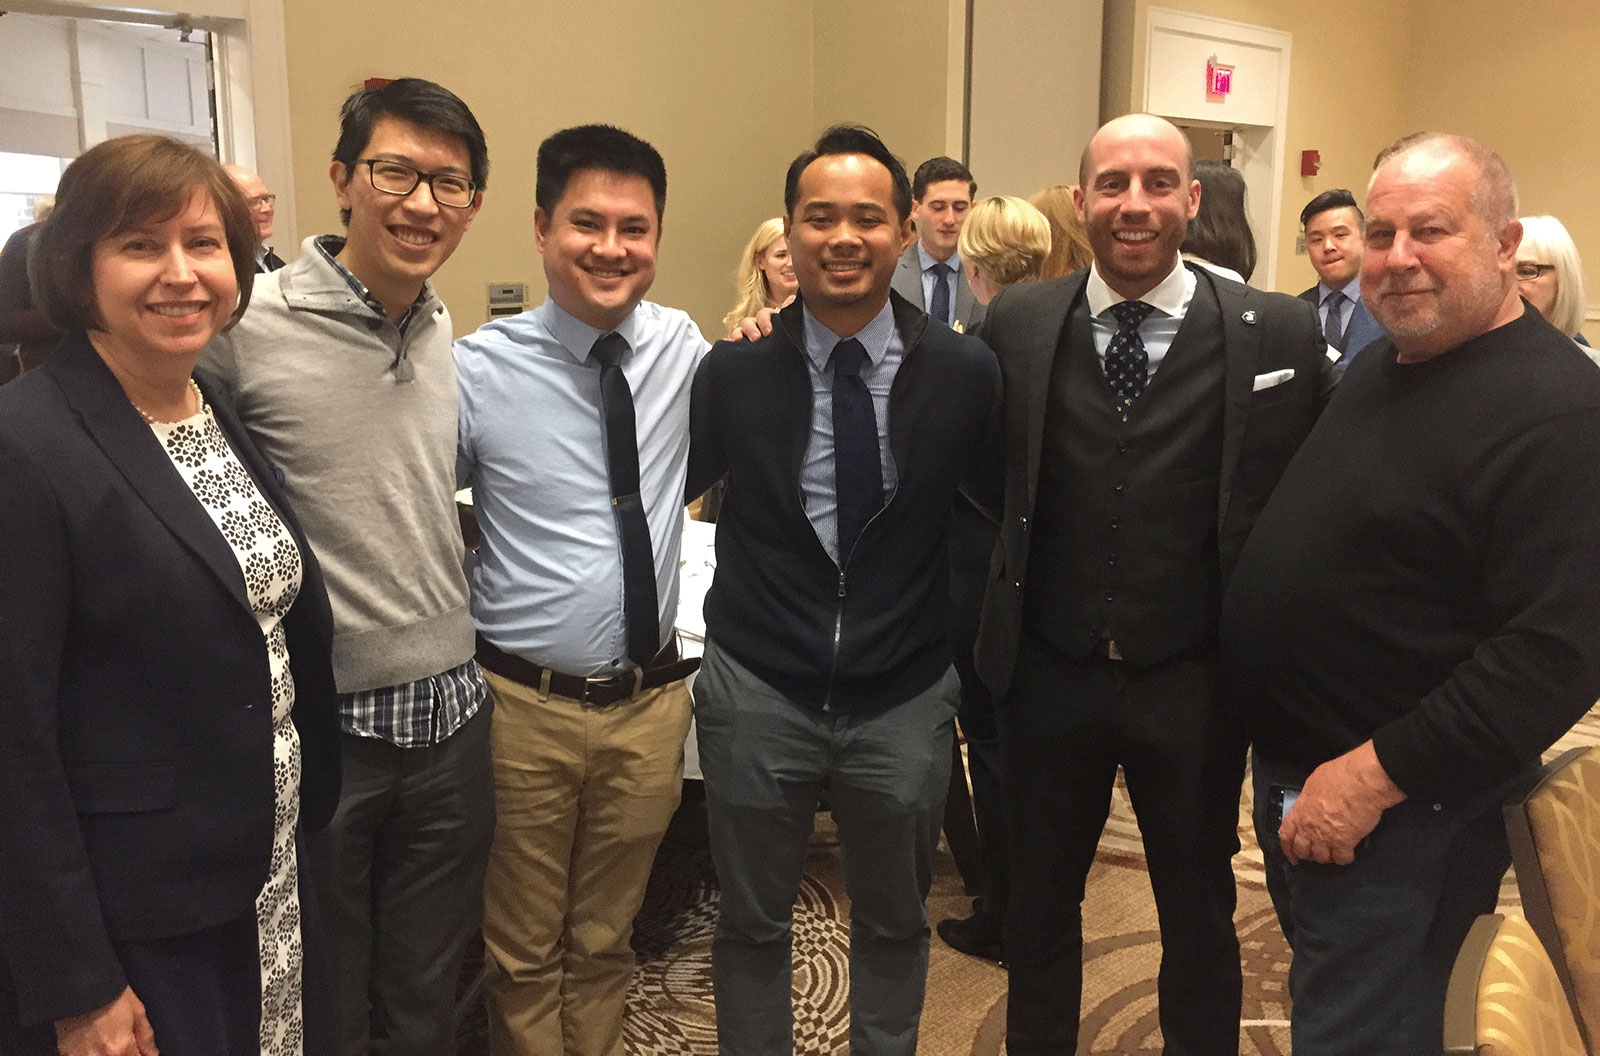 Penn State College of Medicine MD/PhD Medical Scientist Training Program co-directors Leslie Parent, MD (left), and Robert Levenson, PhD (right), are seen with four of the five program students who matched with residencies during the March 2018 Match Day celebration. The students are, from left, Paul Hsu, Jeffrey Nguyen, Ron Panganiban and Francis LeBlanc. Nicholas Sterling, who also matched, is not pictured. The six people are seen standing in a line in a crowded room, smiling, wearing dress clothes, with their arms around each other.